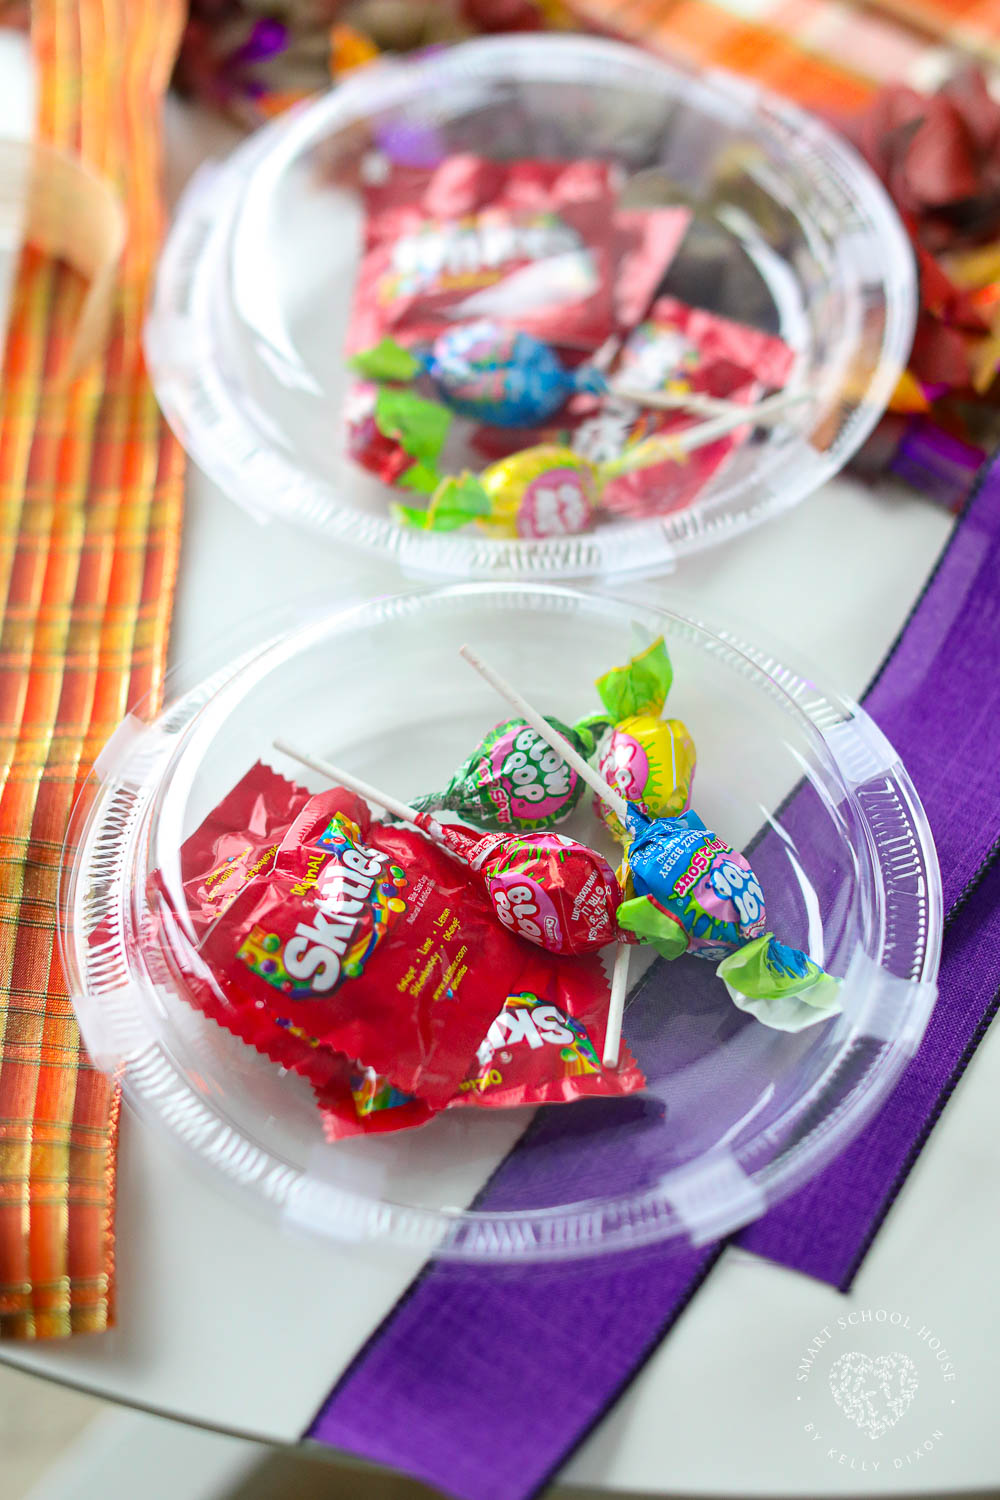 Candy taped inside 2 clear plates